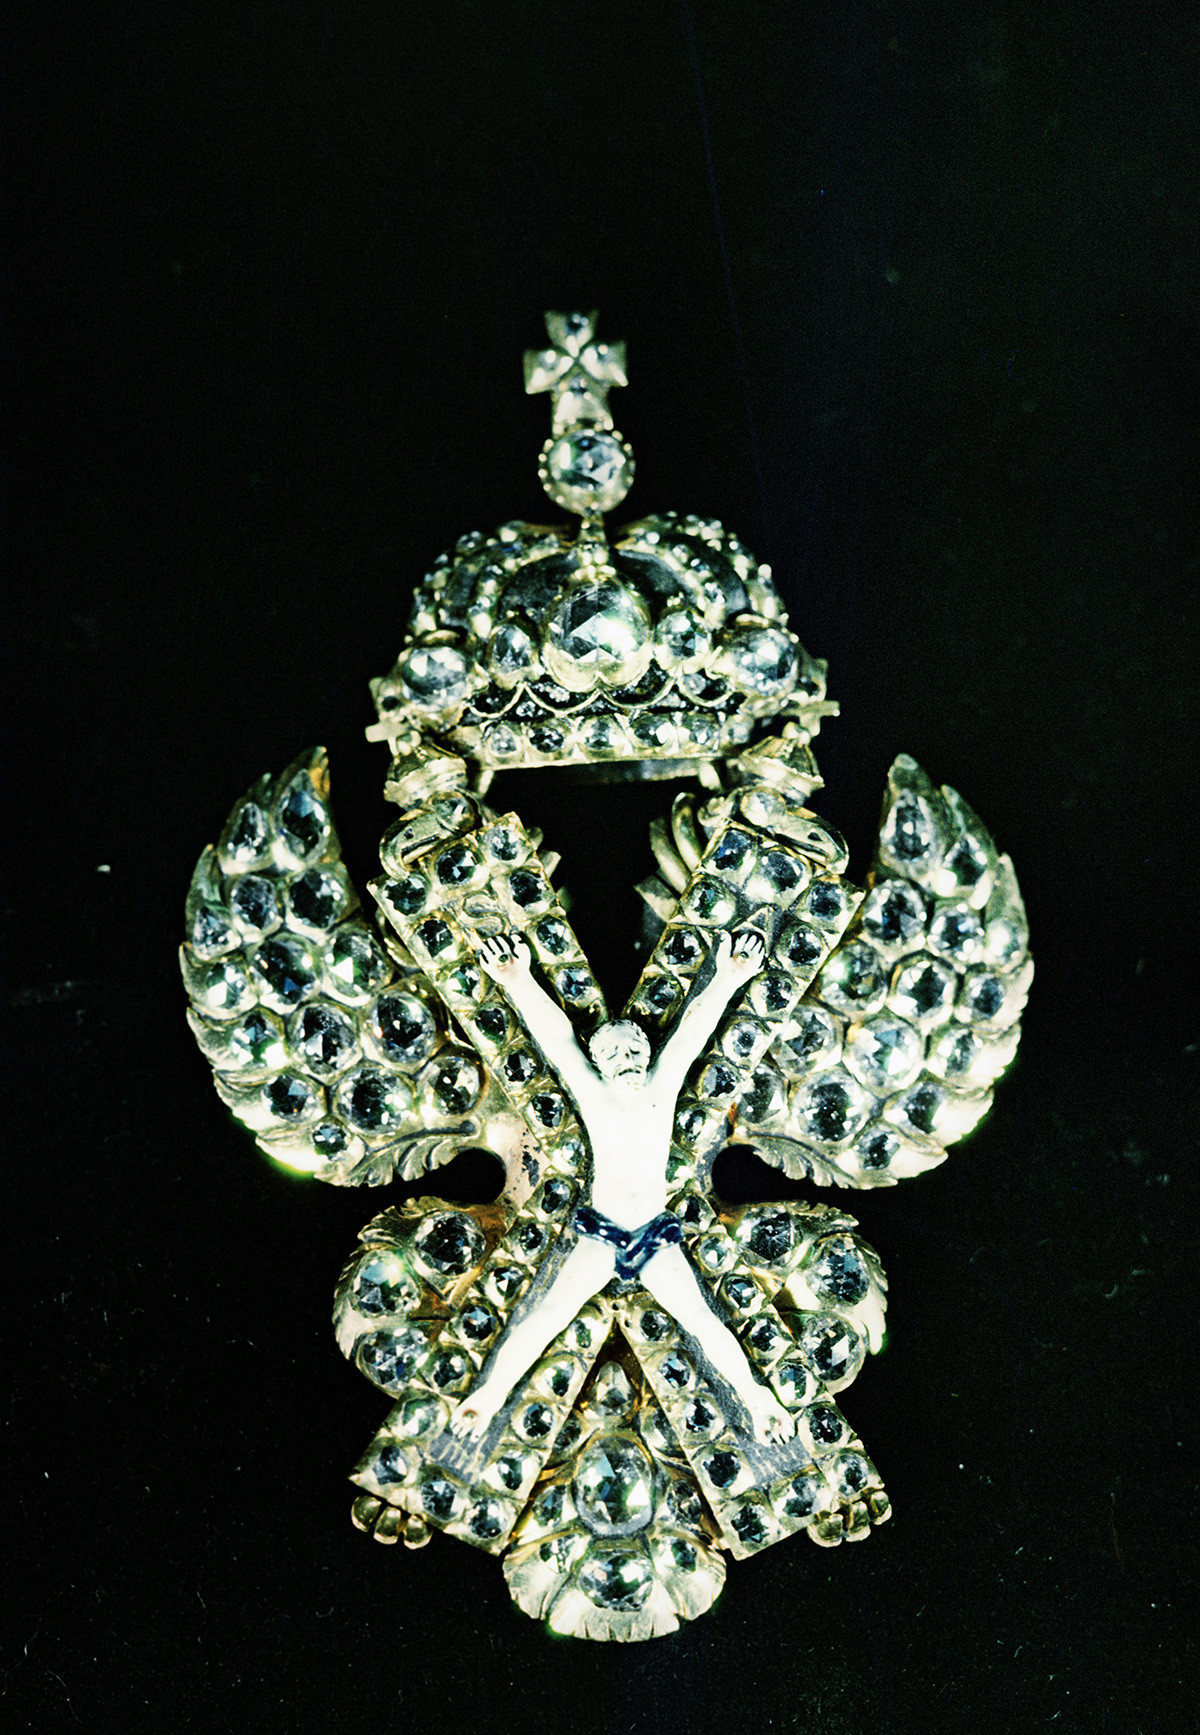 The Badge of the Order of St. Andrew.

